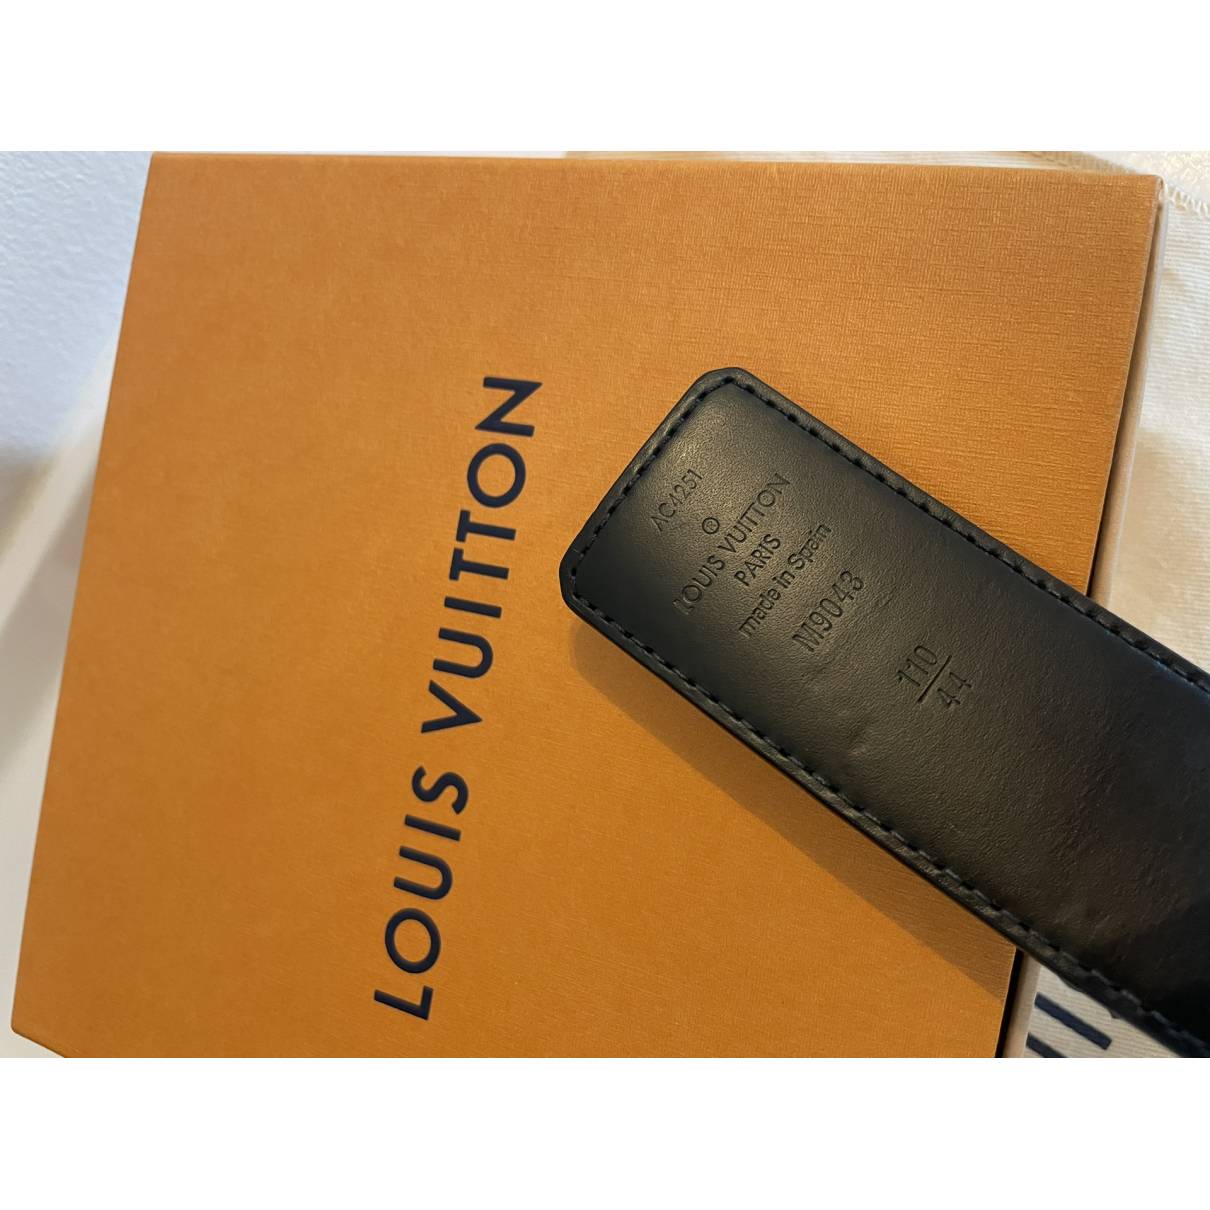 Initiales leather belt Louis Vuitton Black size 100 cm in Leather - 31957996